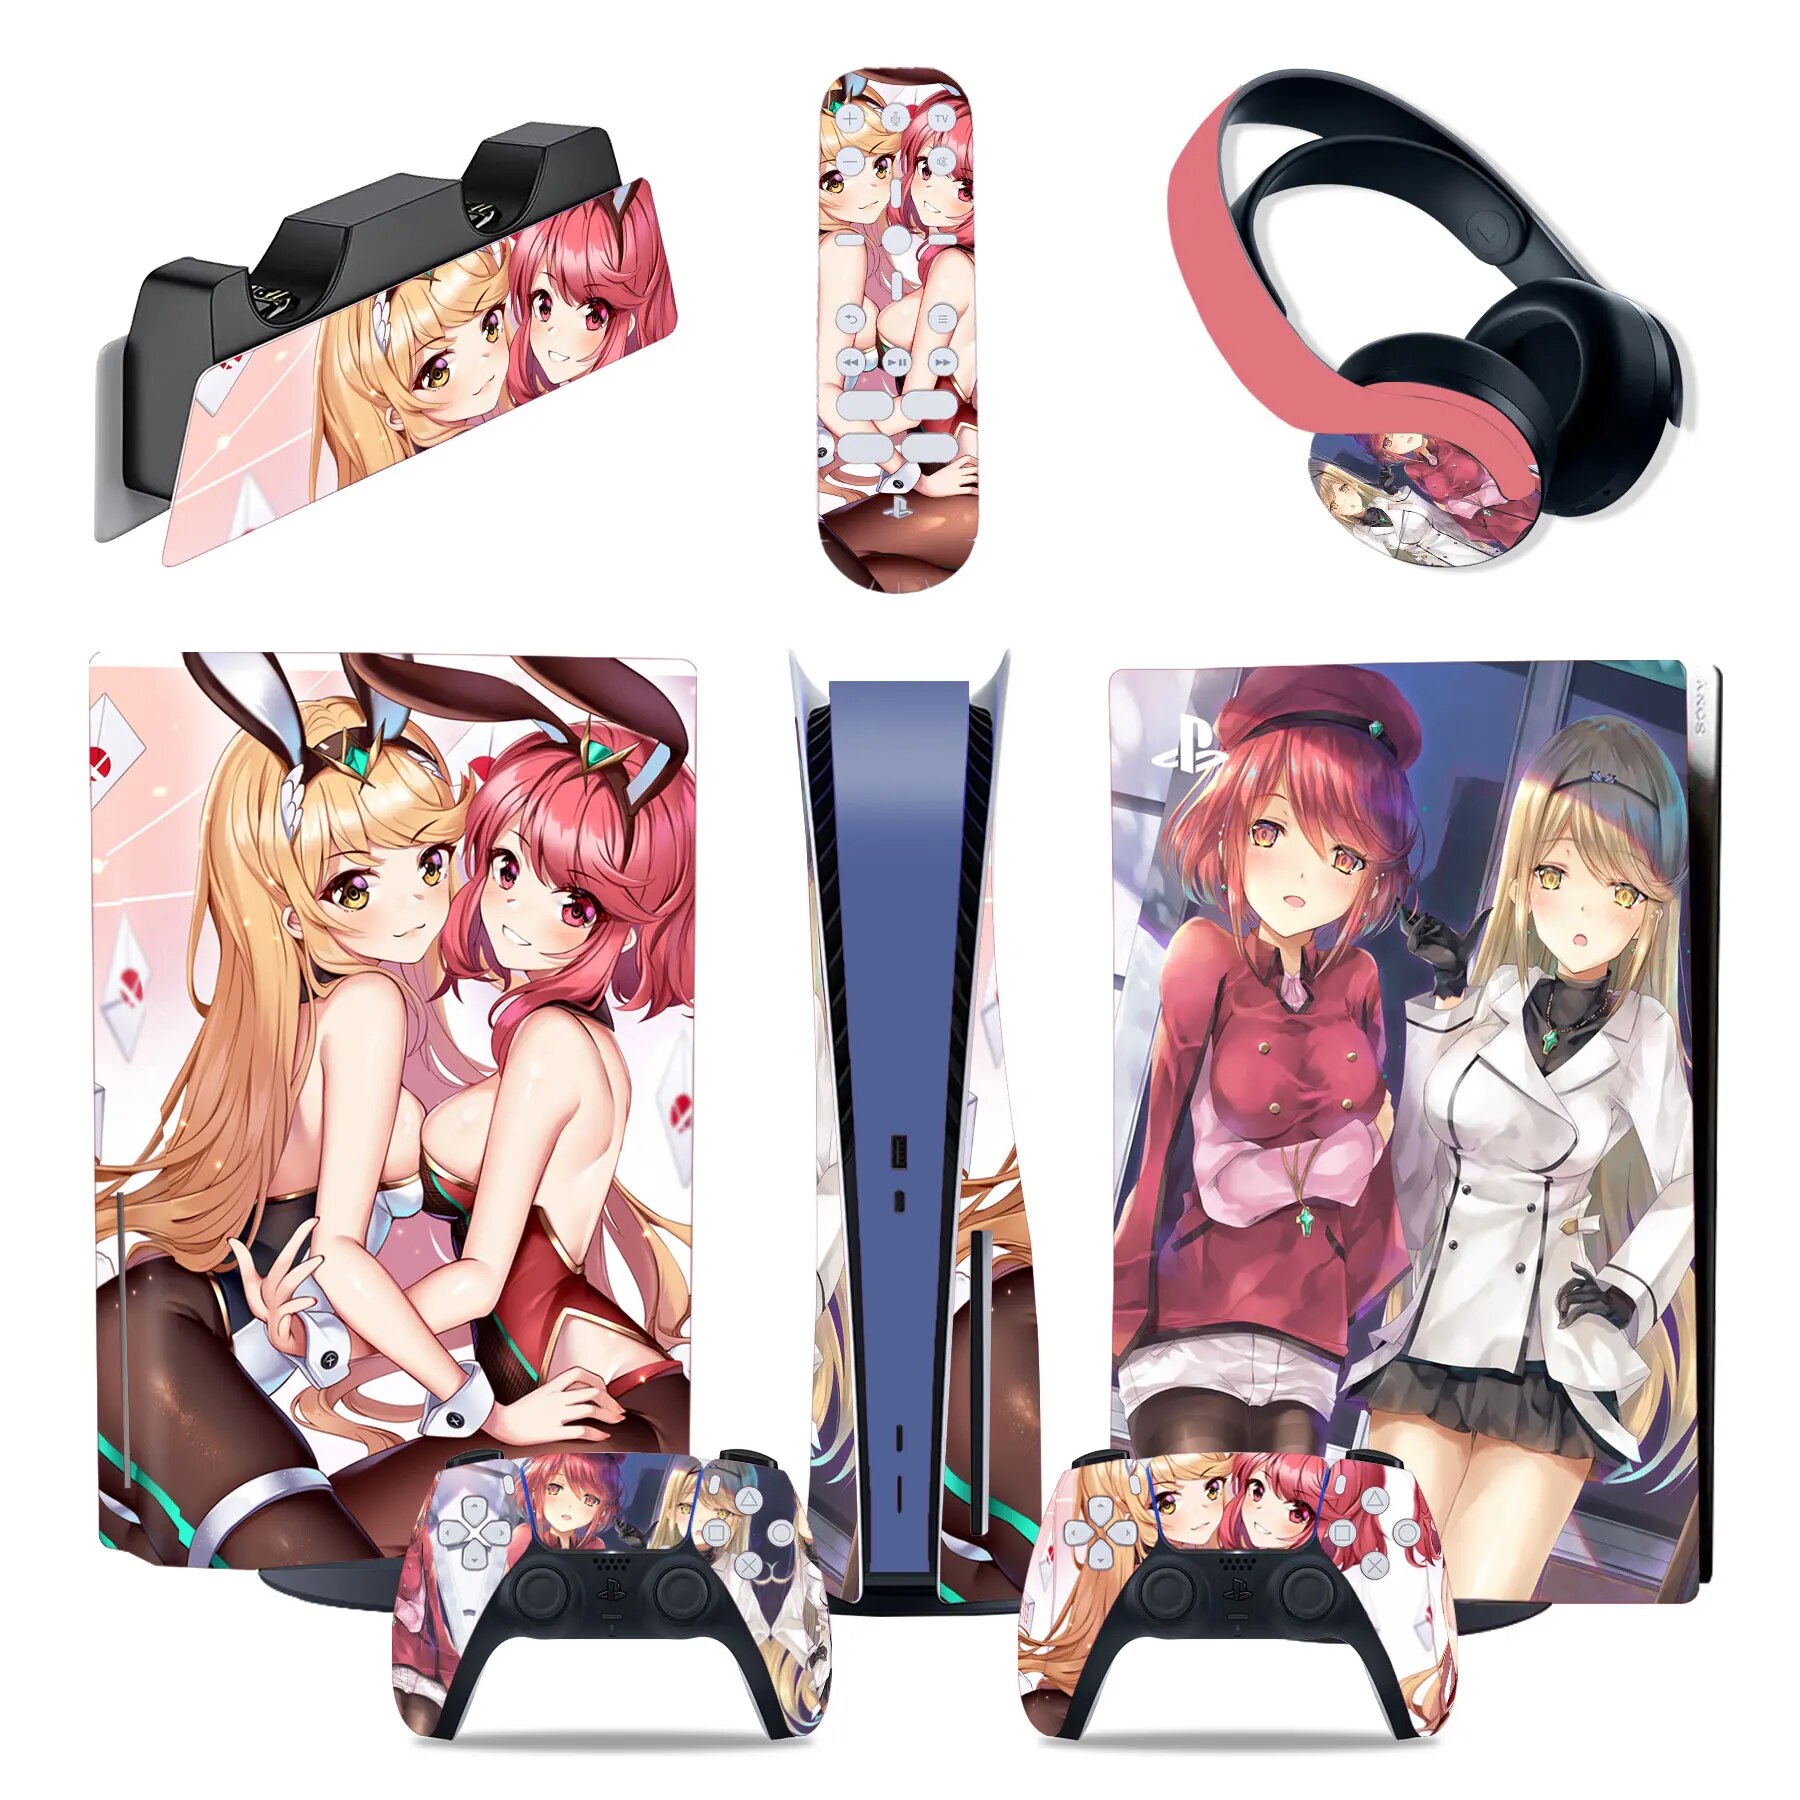 【Be worth】 Cute Girl Anime Ps5 Disc Edition 5in1 Skin Sticker Decal Cover For 5 Console Controller Skin Sticker Vinyl